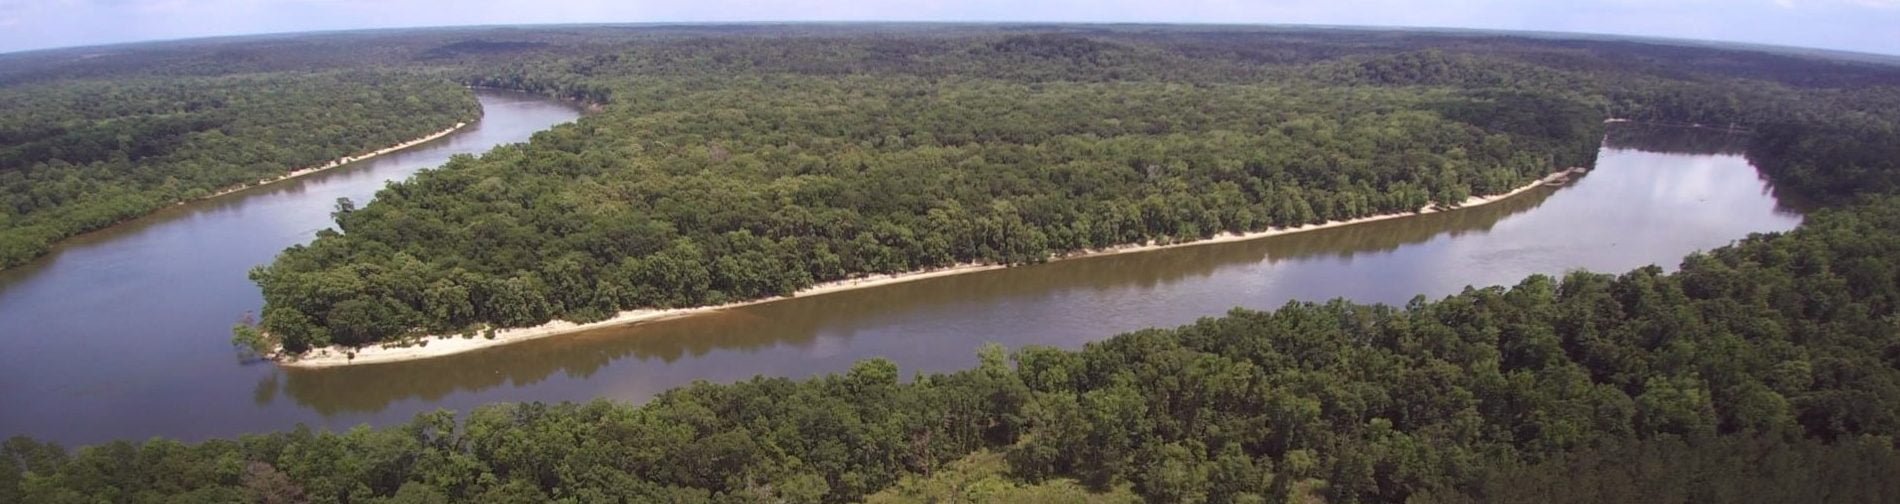 Ap River Upstream from Connected ecosystem